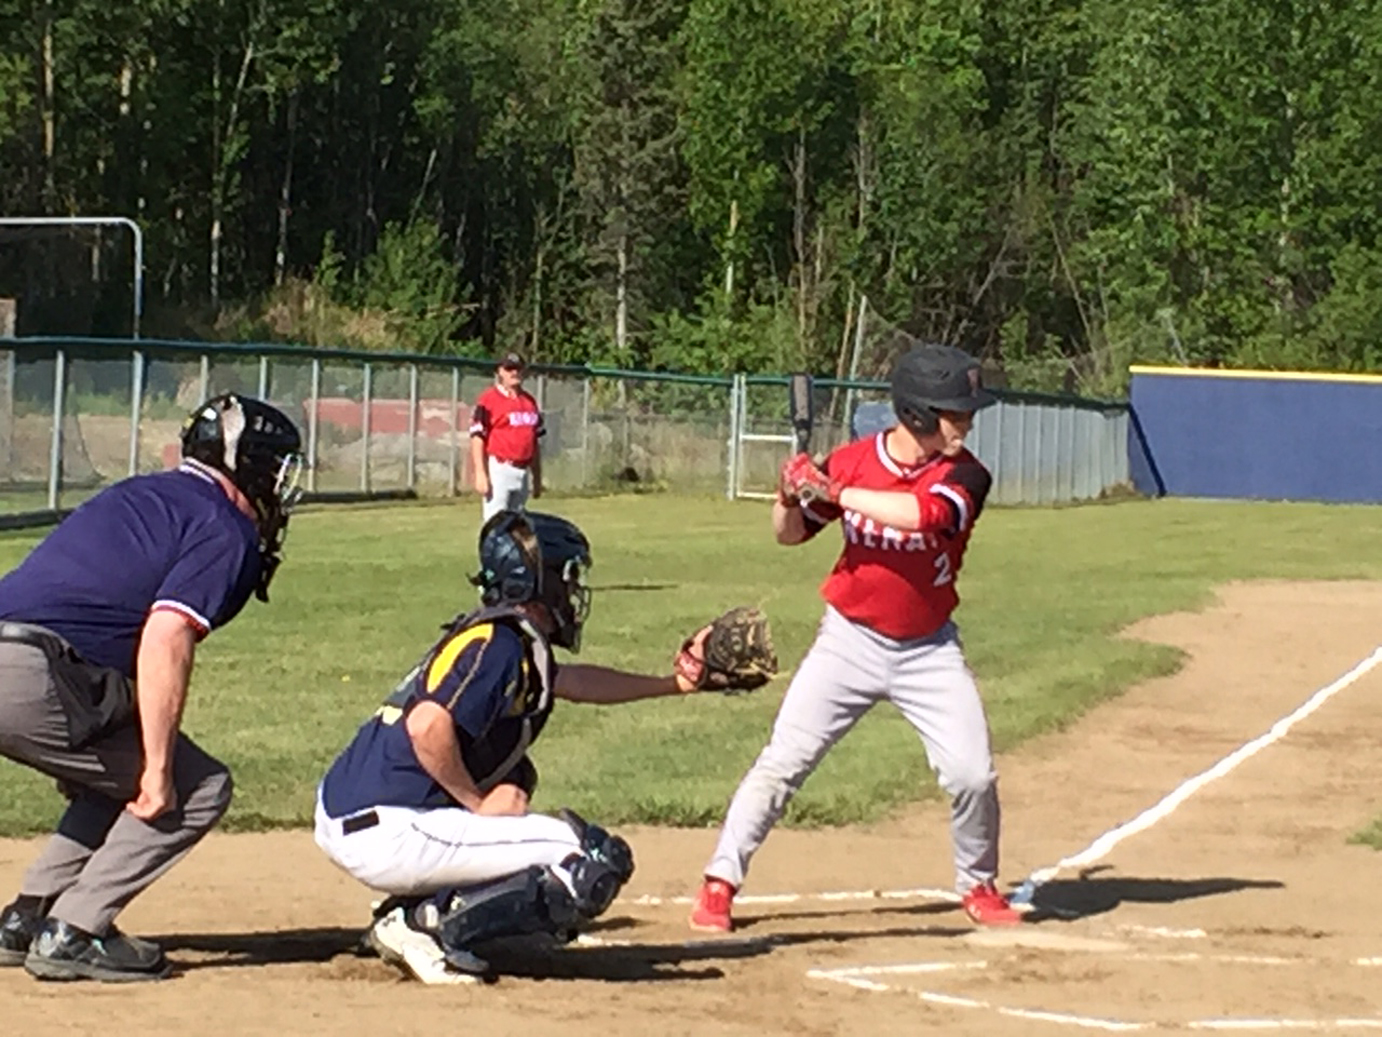 Mariner Greg Smith catches during the game against Kenai at Regions. After defeating the Kardinals twice during conference play, Homer fell to Kenai, 10-7.